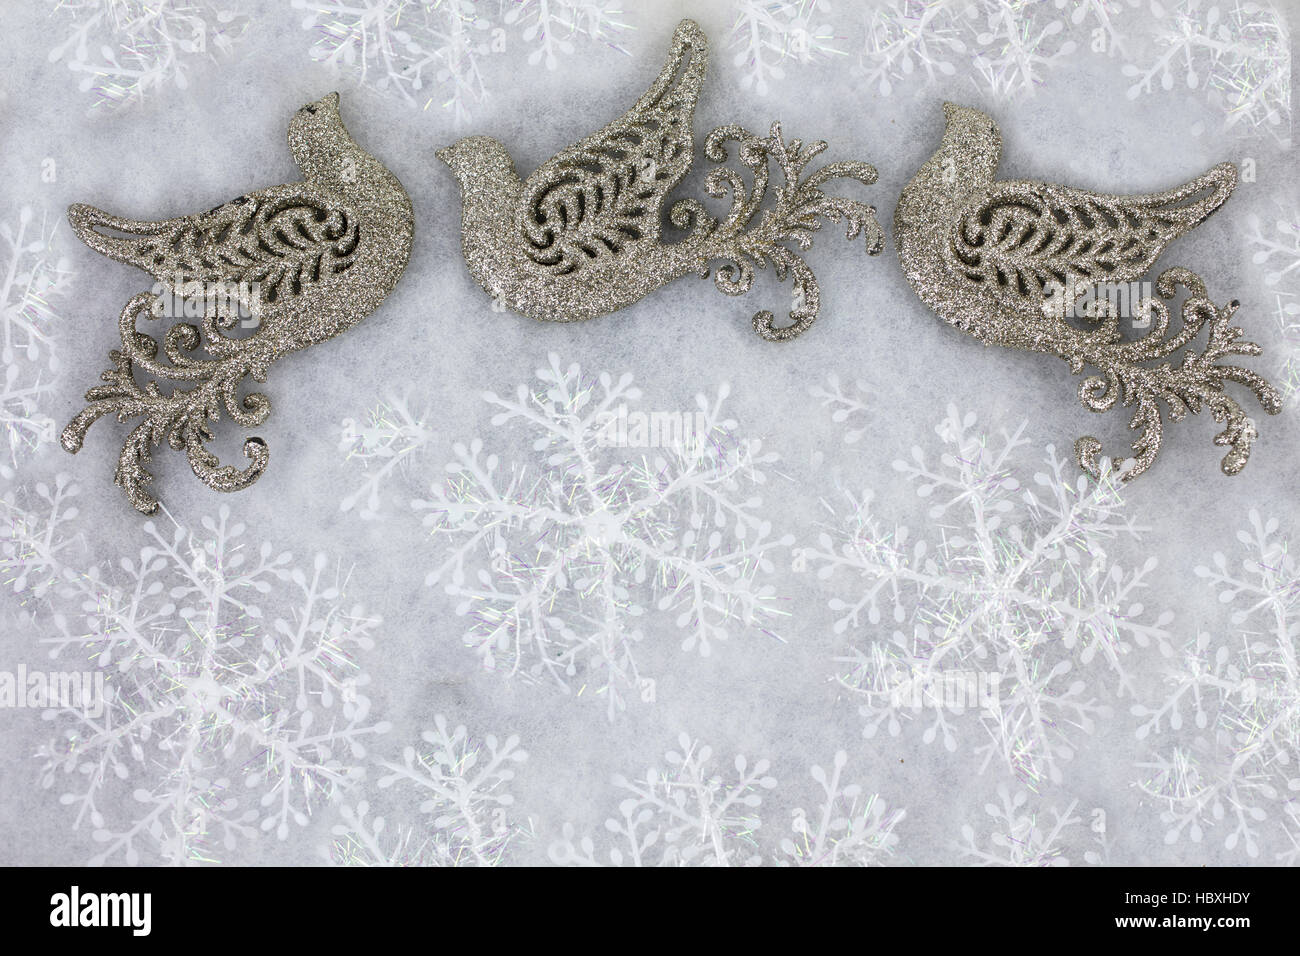 Christmas doves and snowflakes decorated as a Christmas greeting background in white and gold Stock Photo